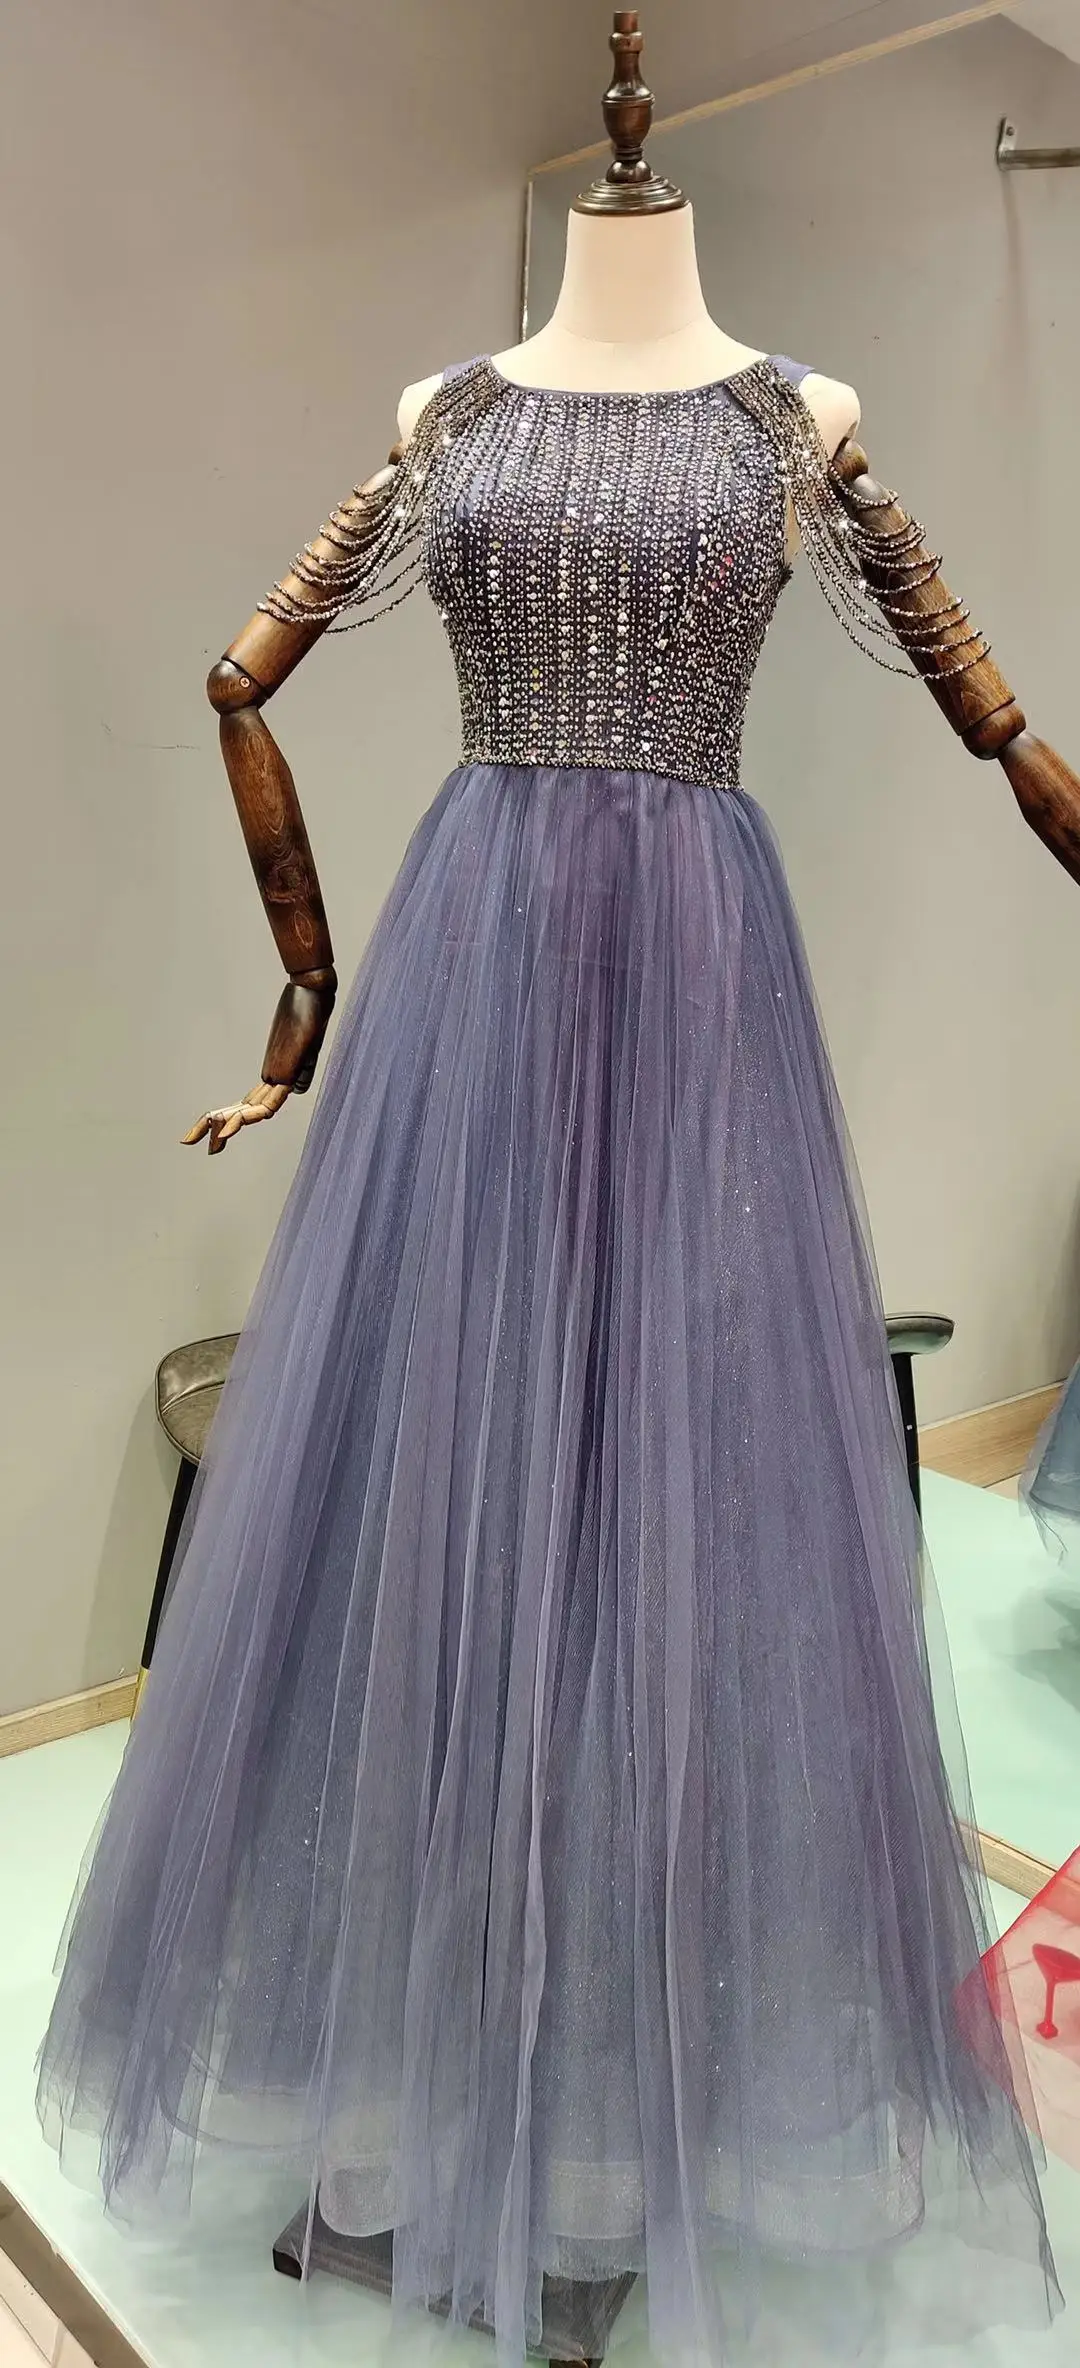 SSYFashion New Evening Dress for Women Real Picture Luxury Halter Tassel Sequins Beading A-line Long Prom Formal Gown Vestidos formal gowns for women